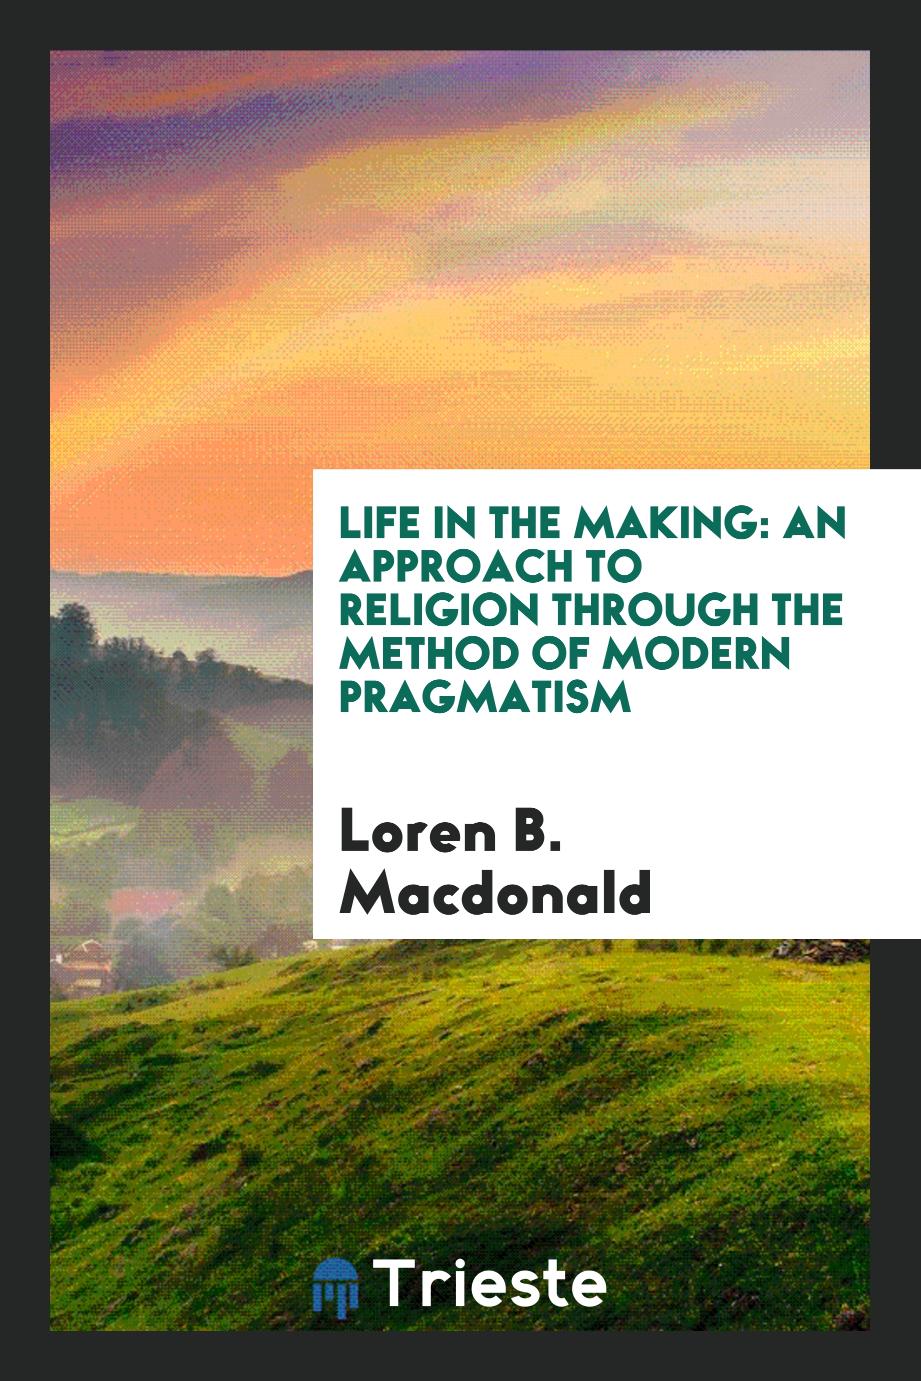 Life in the Making: An Approach to Religion through the Method of Modern Pragmatism